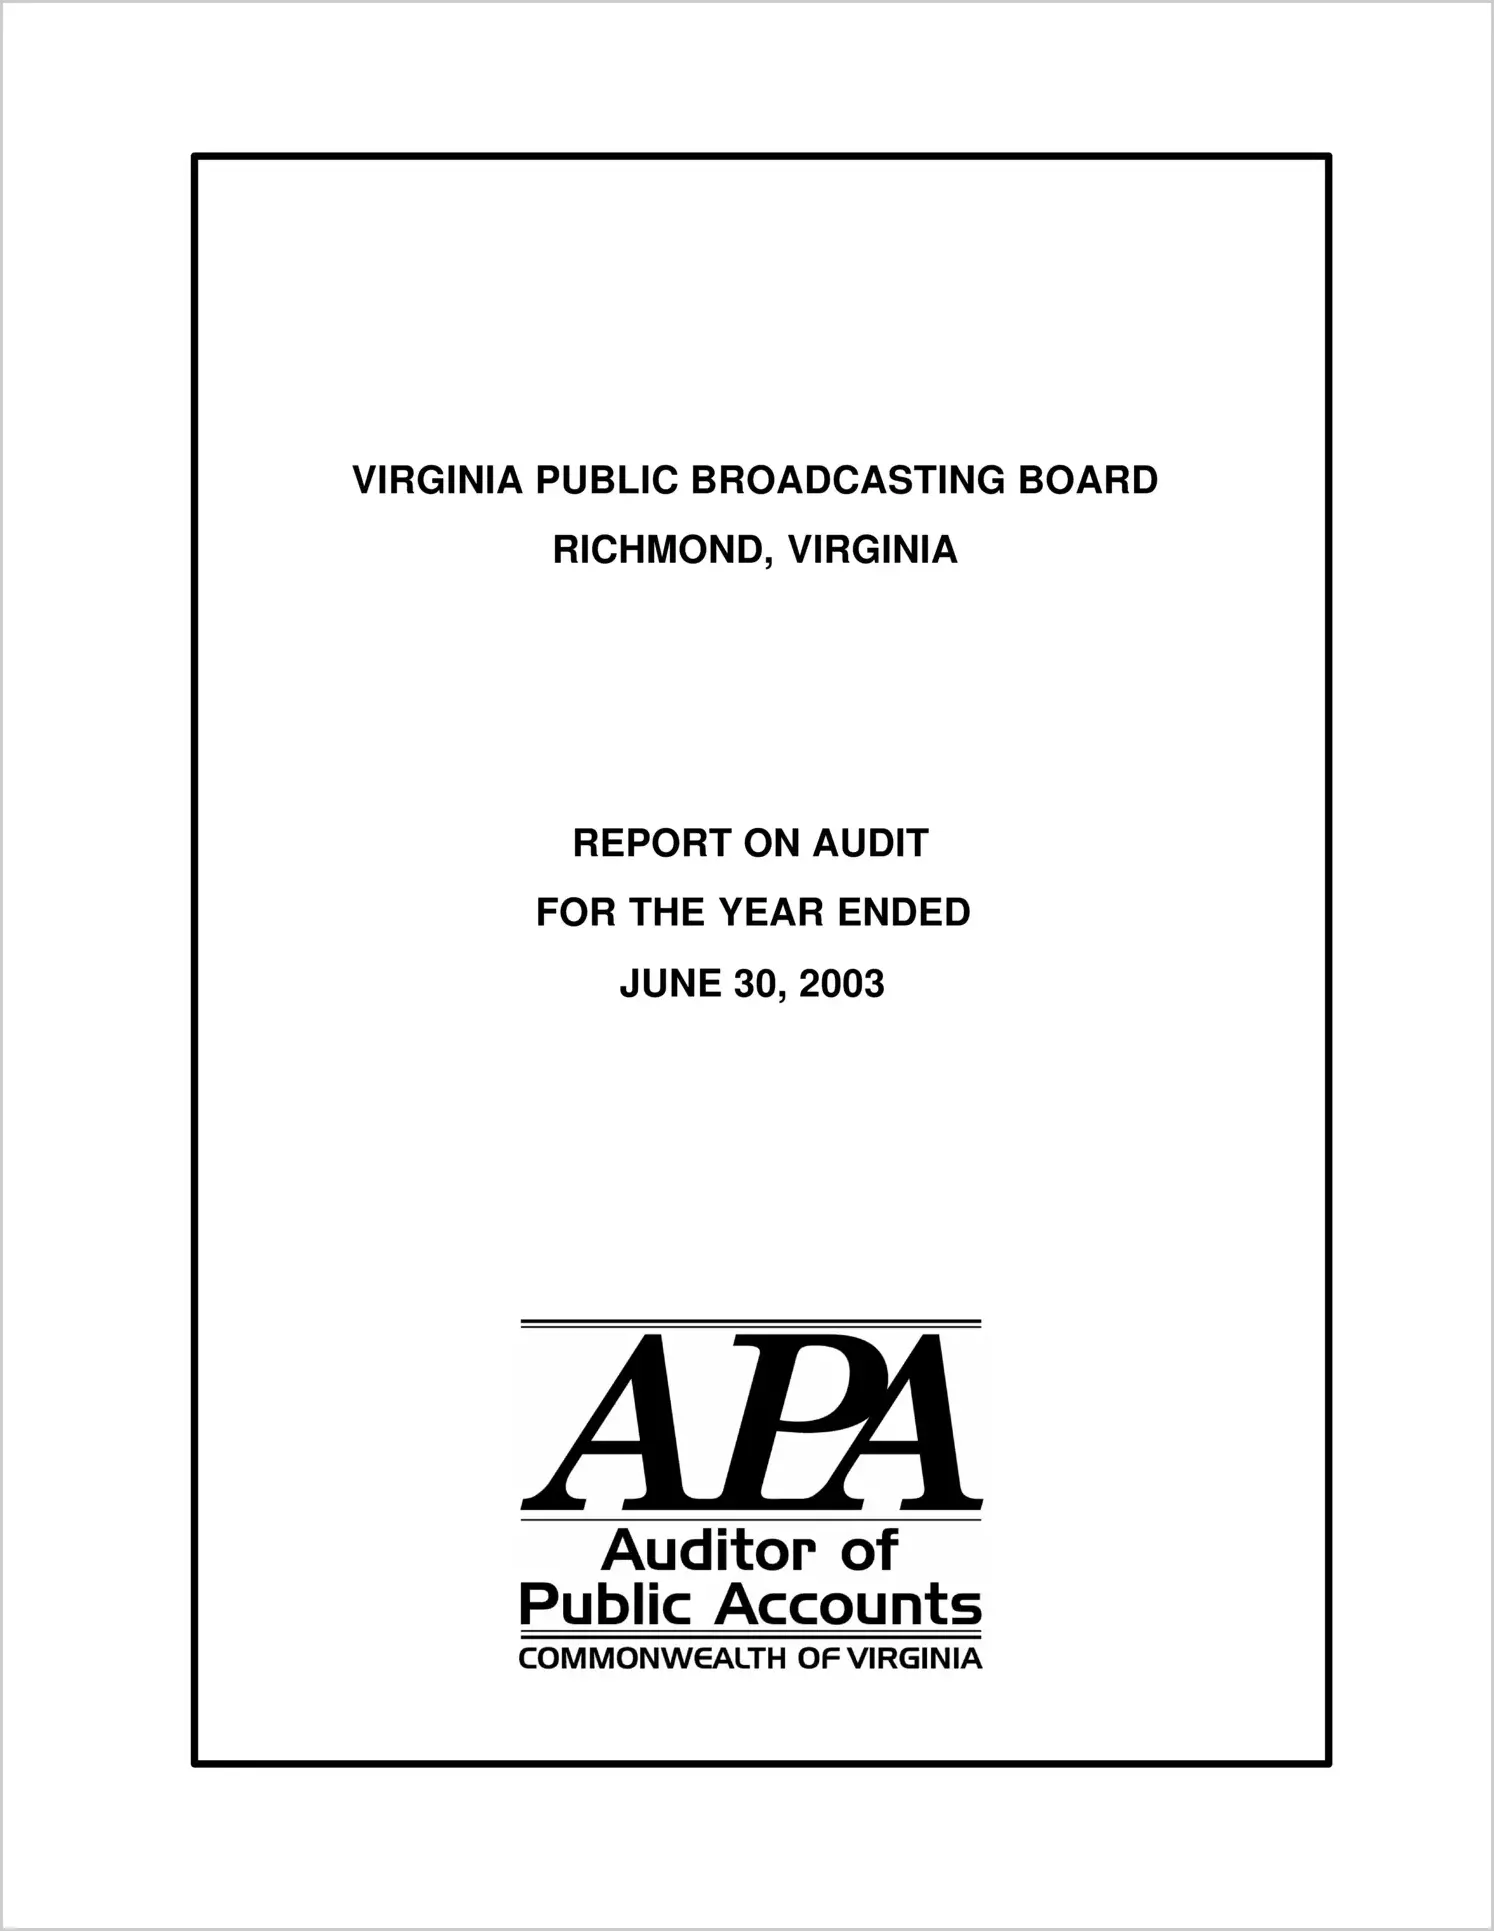 Virginia Public Broadcasting Board for the year ended June 30, 2003